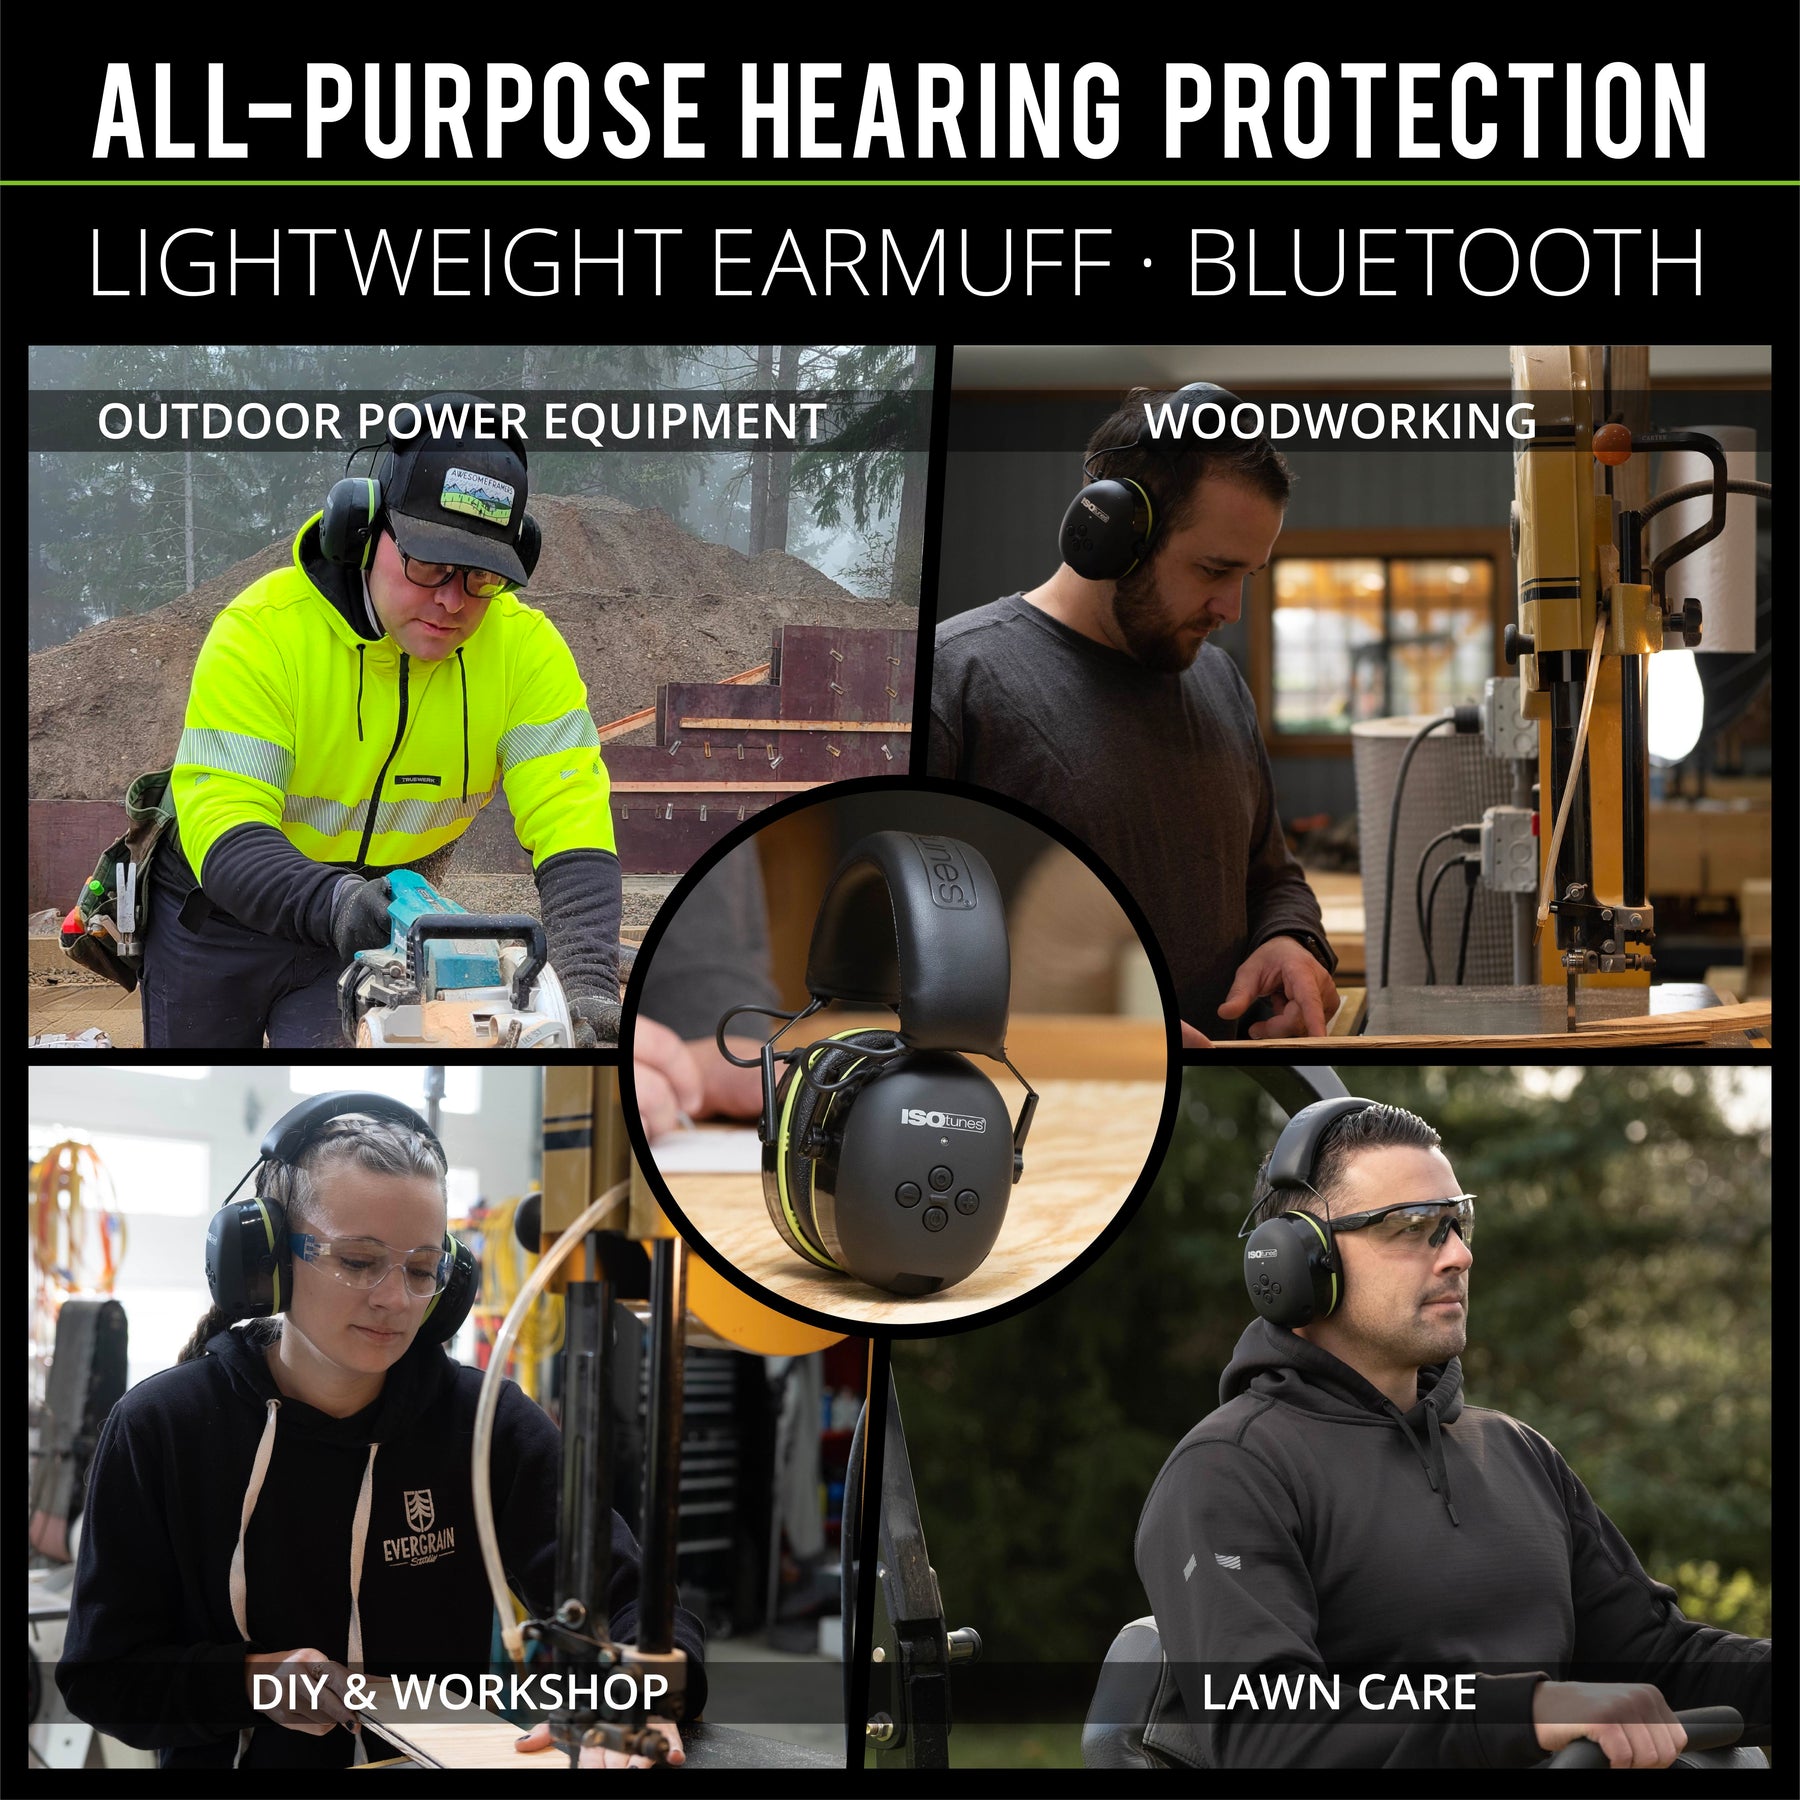 ISOtunes AIR DEFENDER All-Purpose Hearing Protection Lightweight Earmuffs with Bluetooth